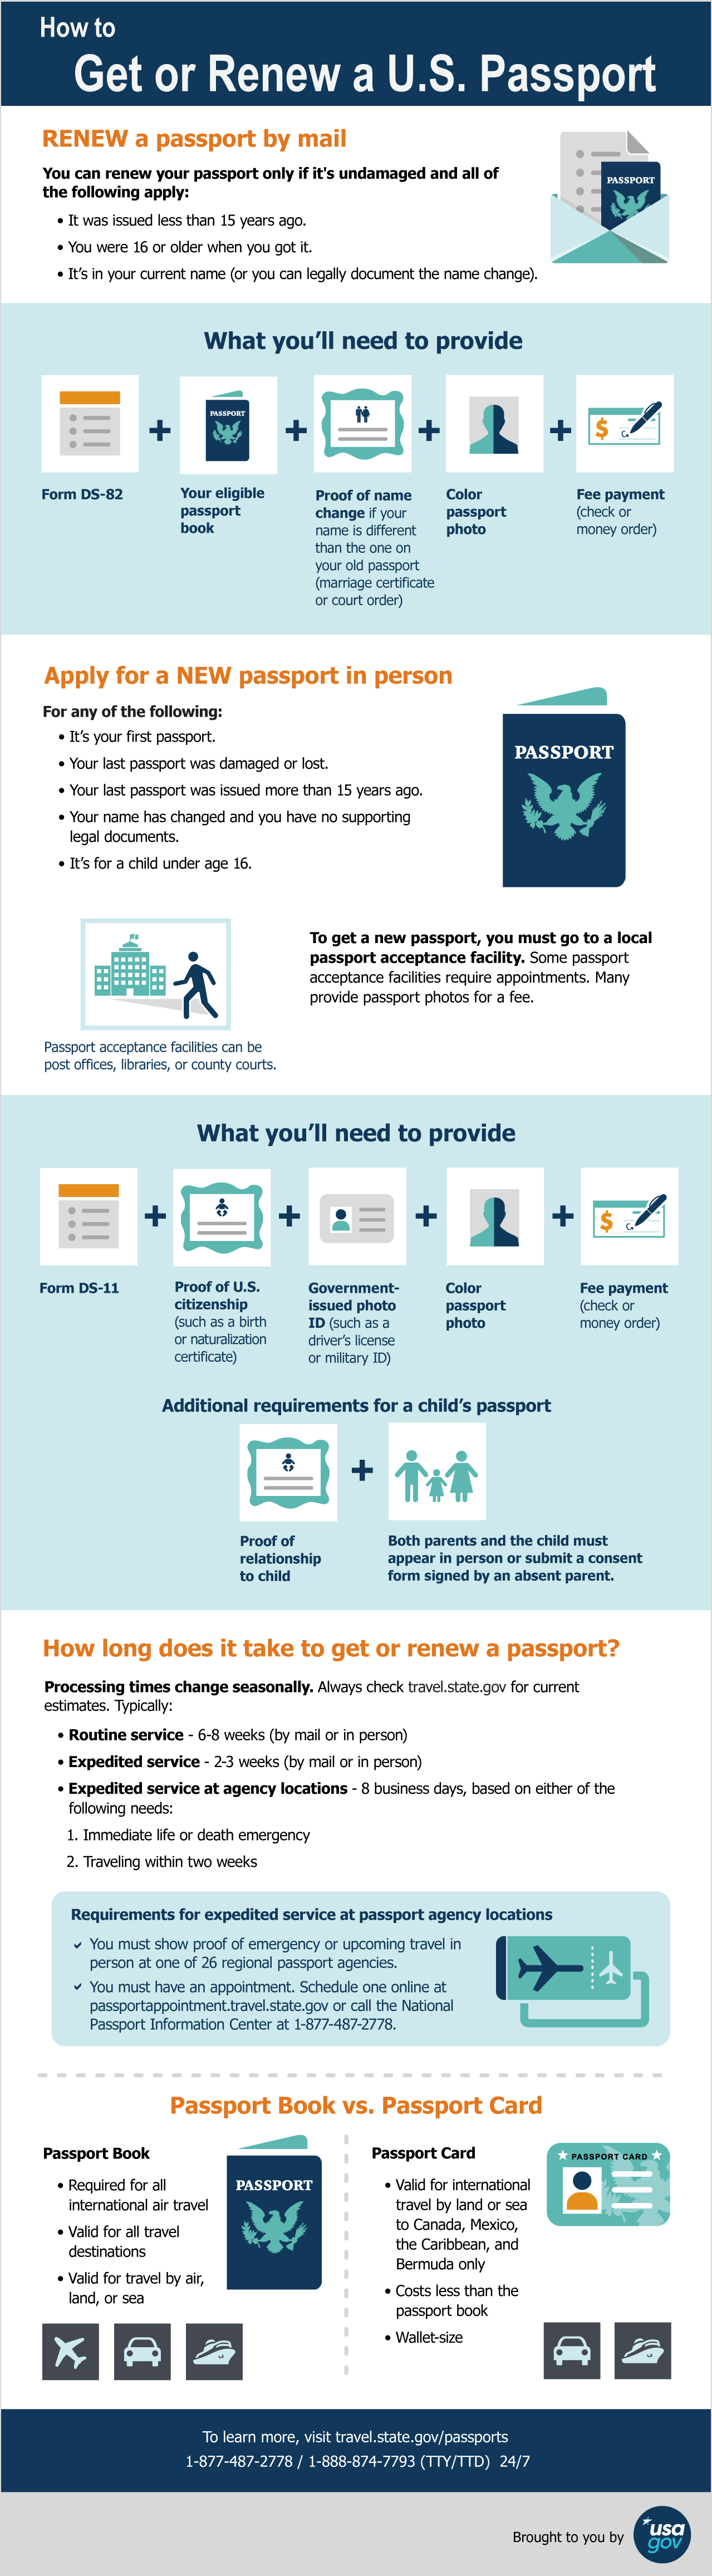 Infographic showing the steps to renew or apply for a U.S. passport. 